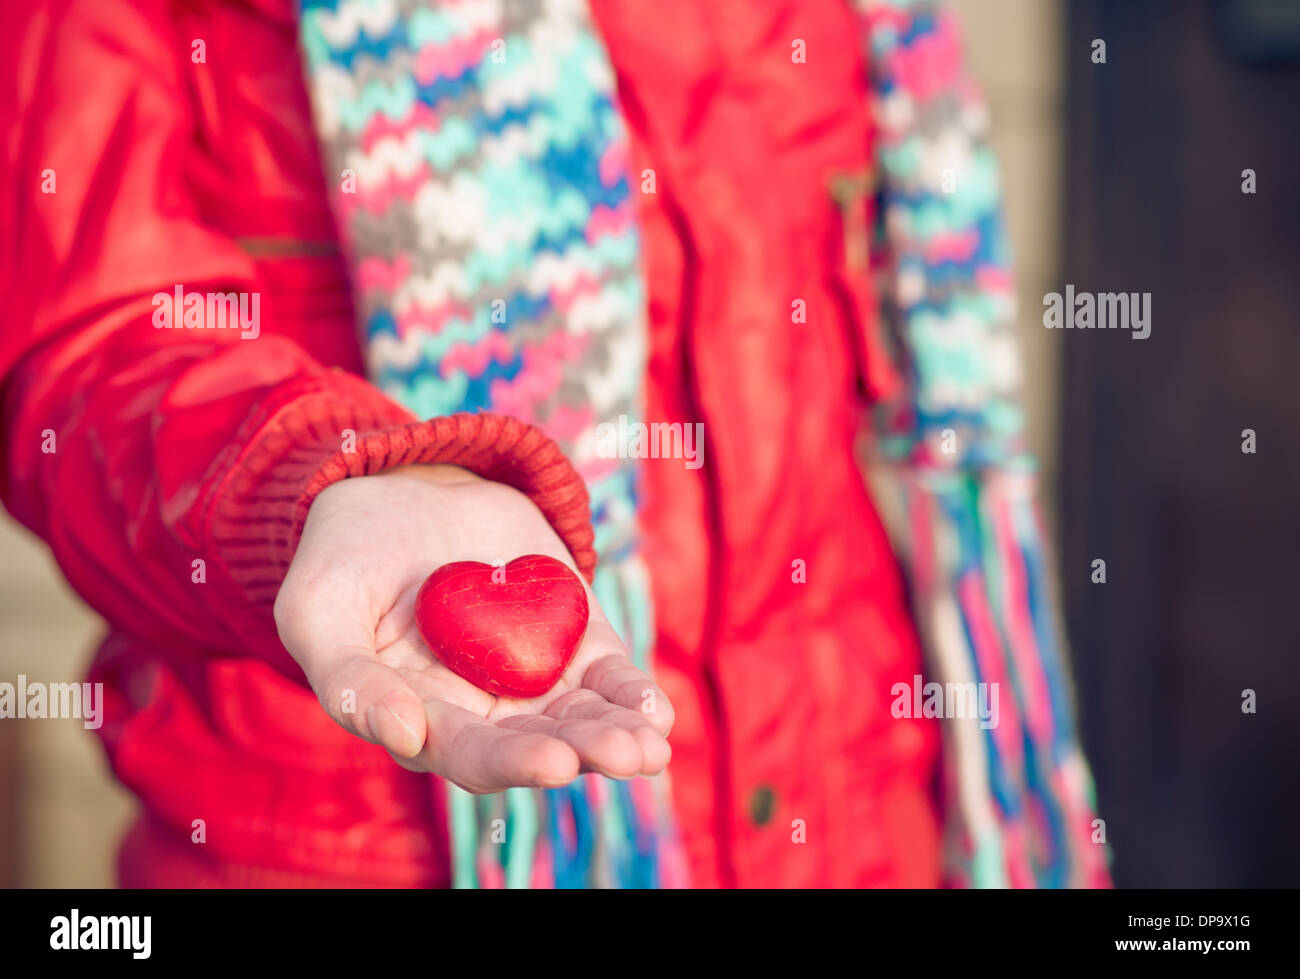 Heart shape love symbol in woman hands Valentines Day romantic greeting people relationship concept winter holiday Stock Photo